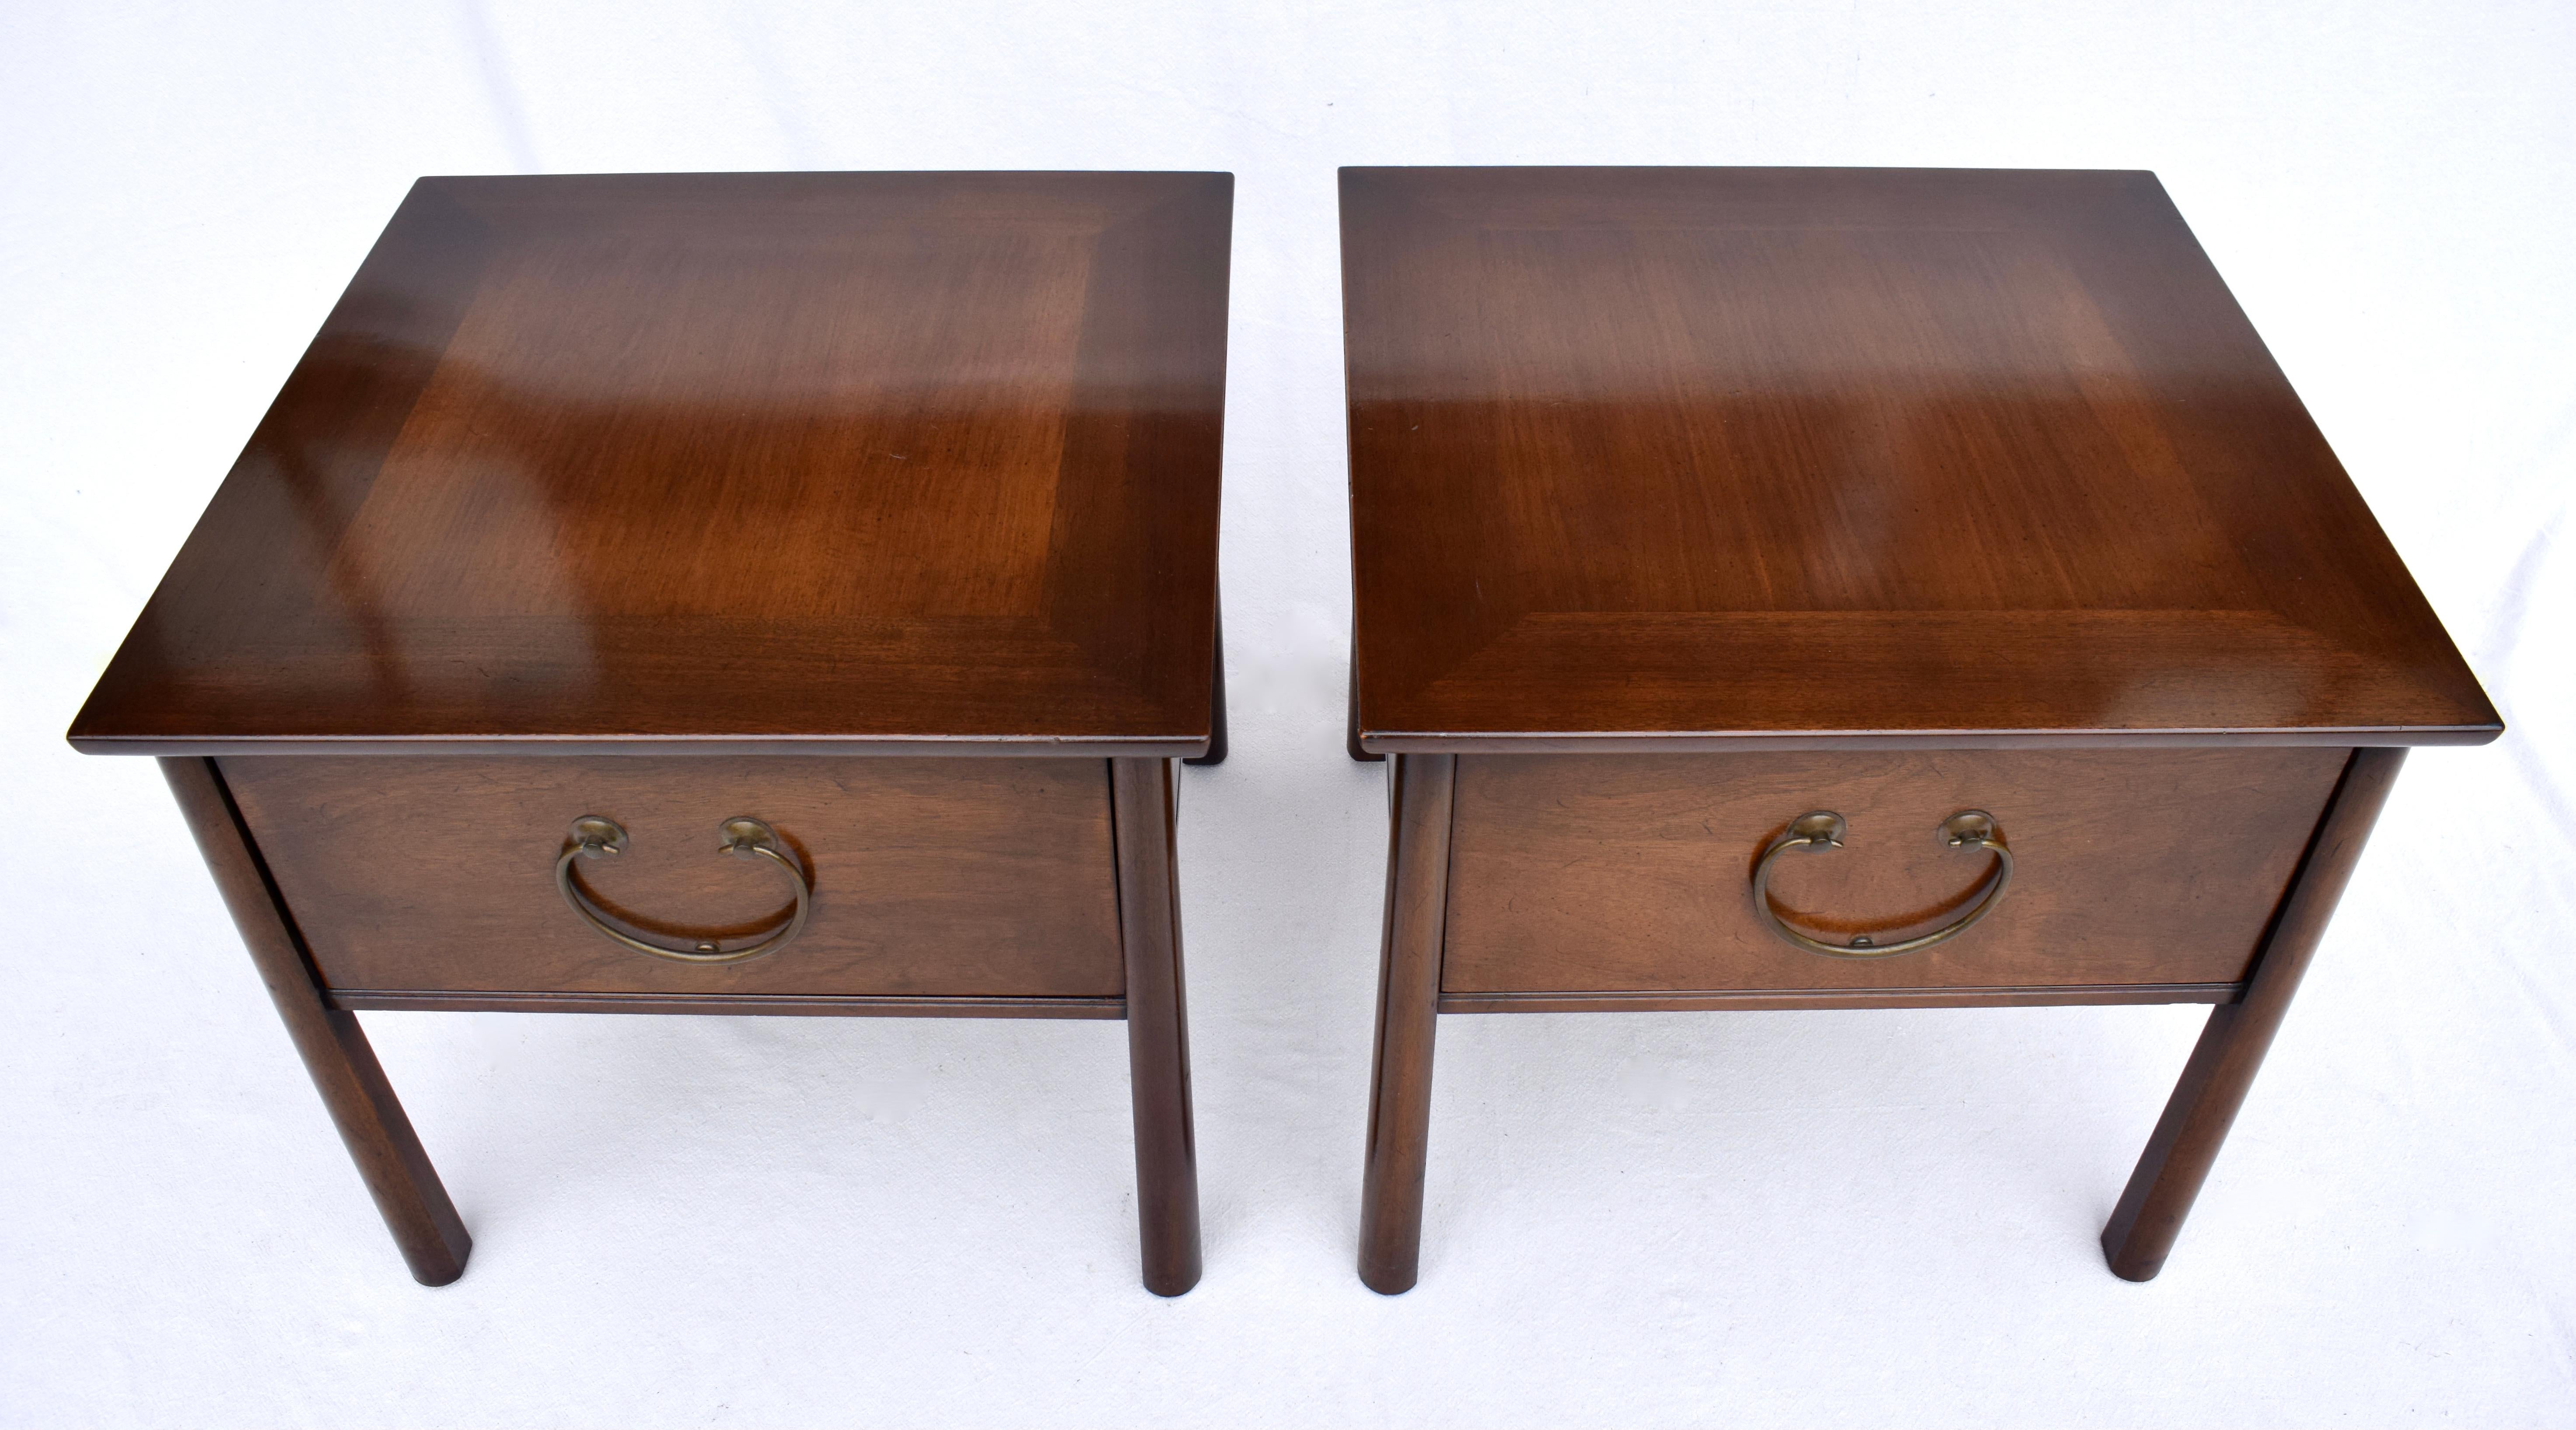 Scarcely seen Henredon Fine Furniture single drawer side end tables or nightstands in Mahogany wood USA circa 1950s. Features include oversized decorative brass pull handles with spacious single drawers & reverse tapered legs bearing the Henredon